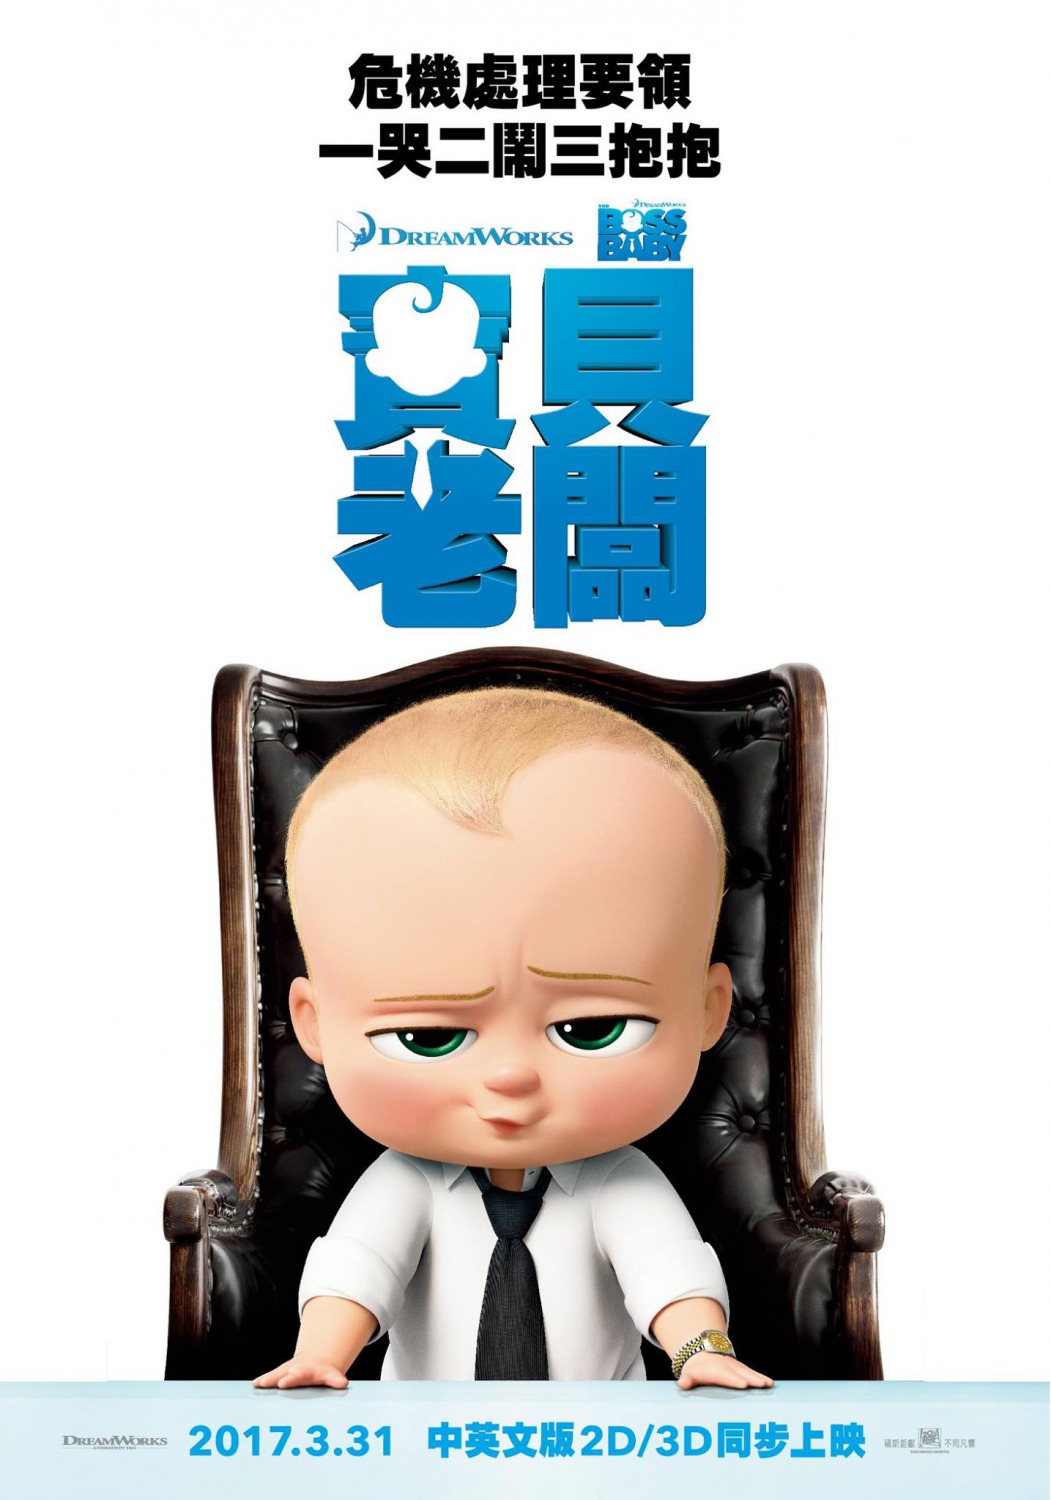 Extra Large Movie Poster Image for The Boss Baby (#3 of 7)